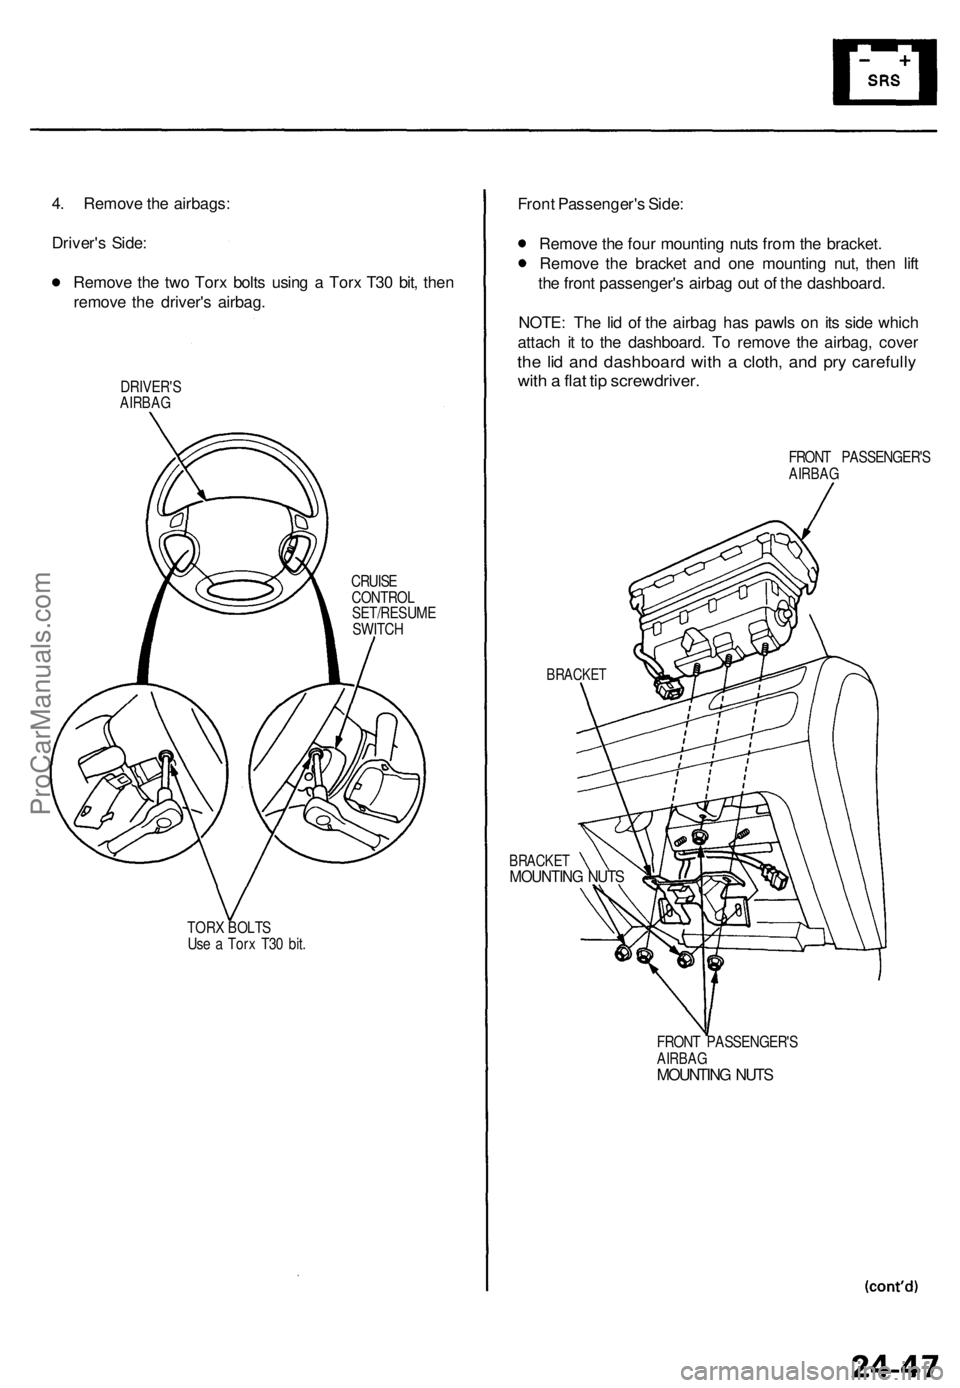 ACURA TL 1995  Service Repair Manual 
4. Remove the airbags:

Driver's Side:

Remove the two Torx bolts using a Torx T30 bit, then

remove the driver's airbag.

DRIVER'S

AIRBAG

CRUISE

CONTROL

SET/RESUME

SWITCH

TORX BOLT